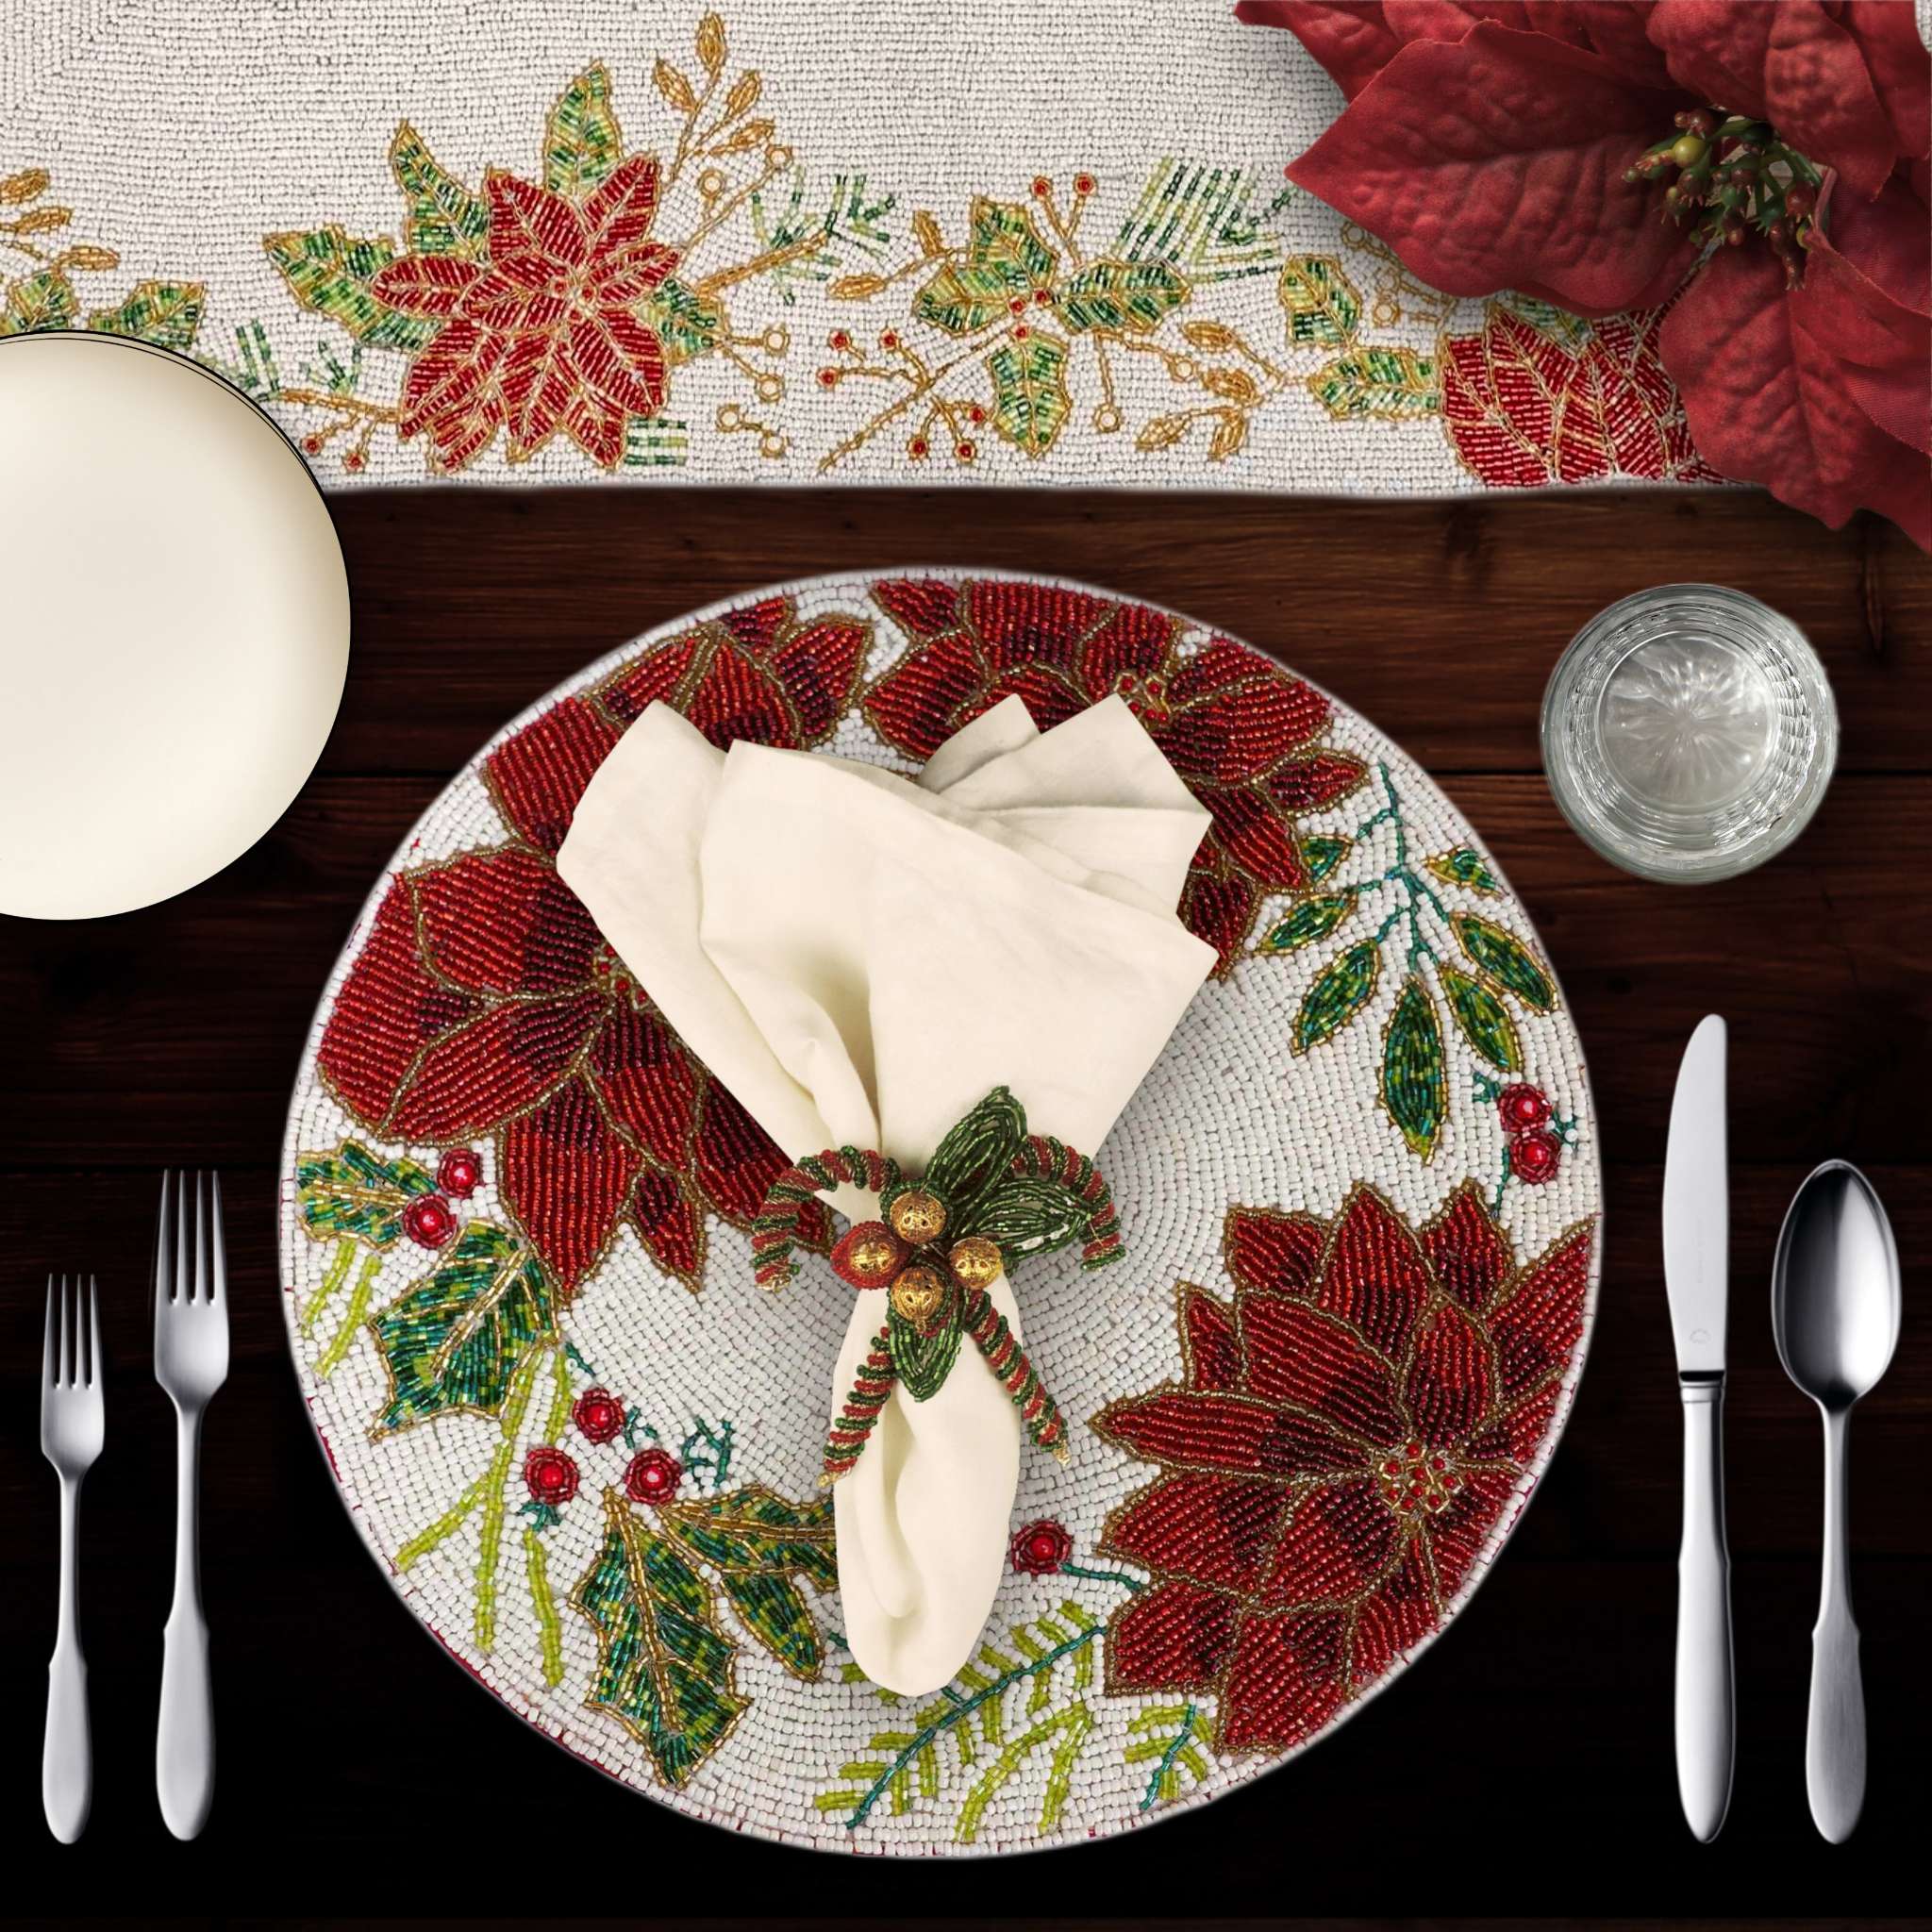 Poinsettia & Holly Bead Embroidered Placemat in Cream, Red & Green, Set of 2